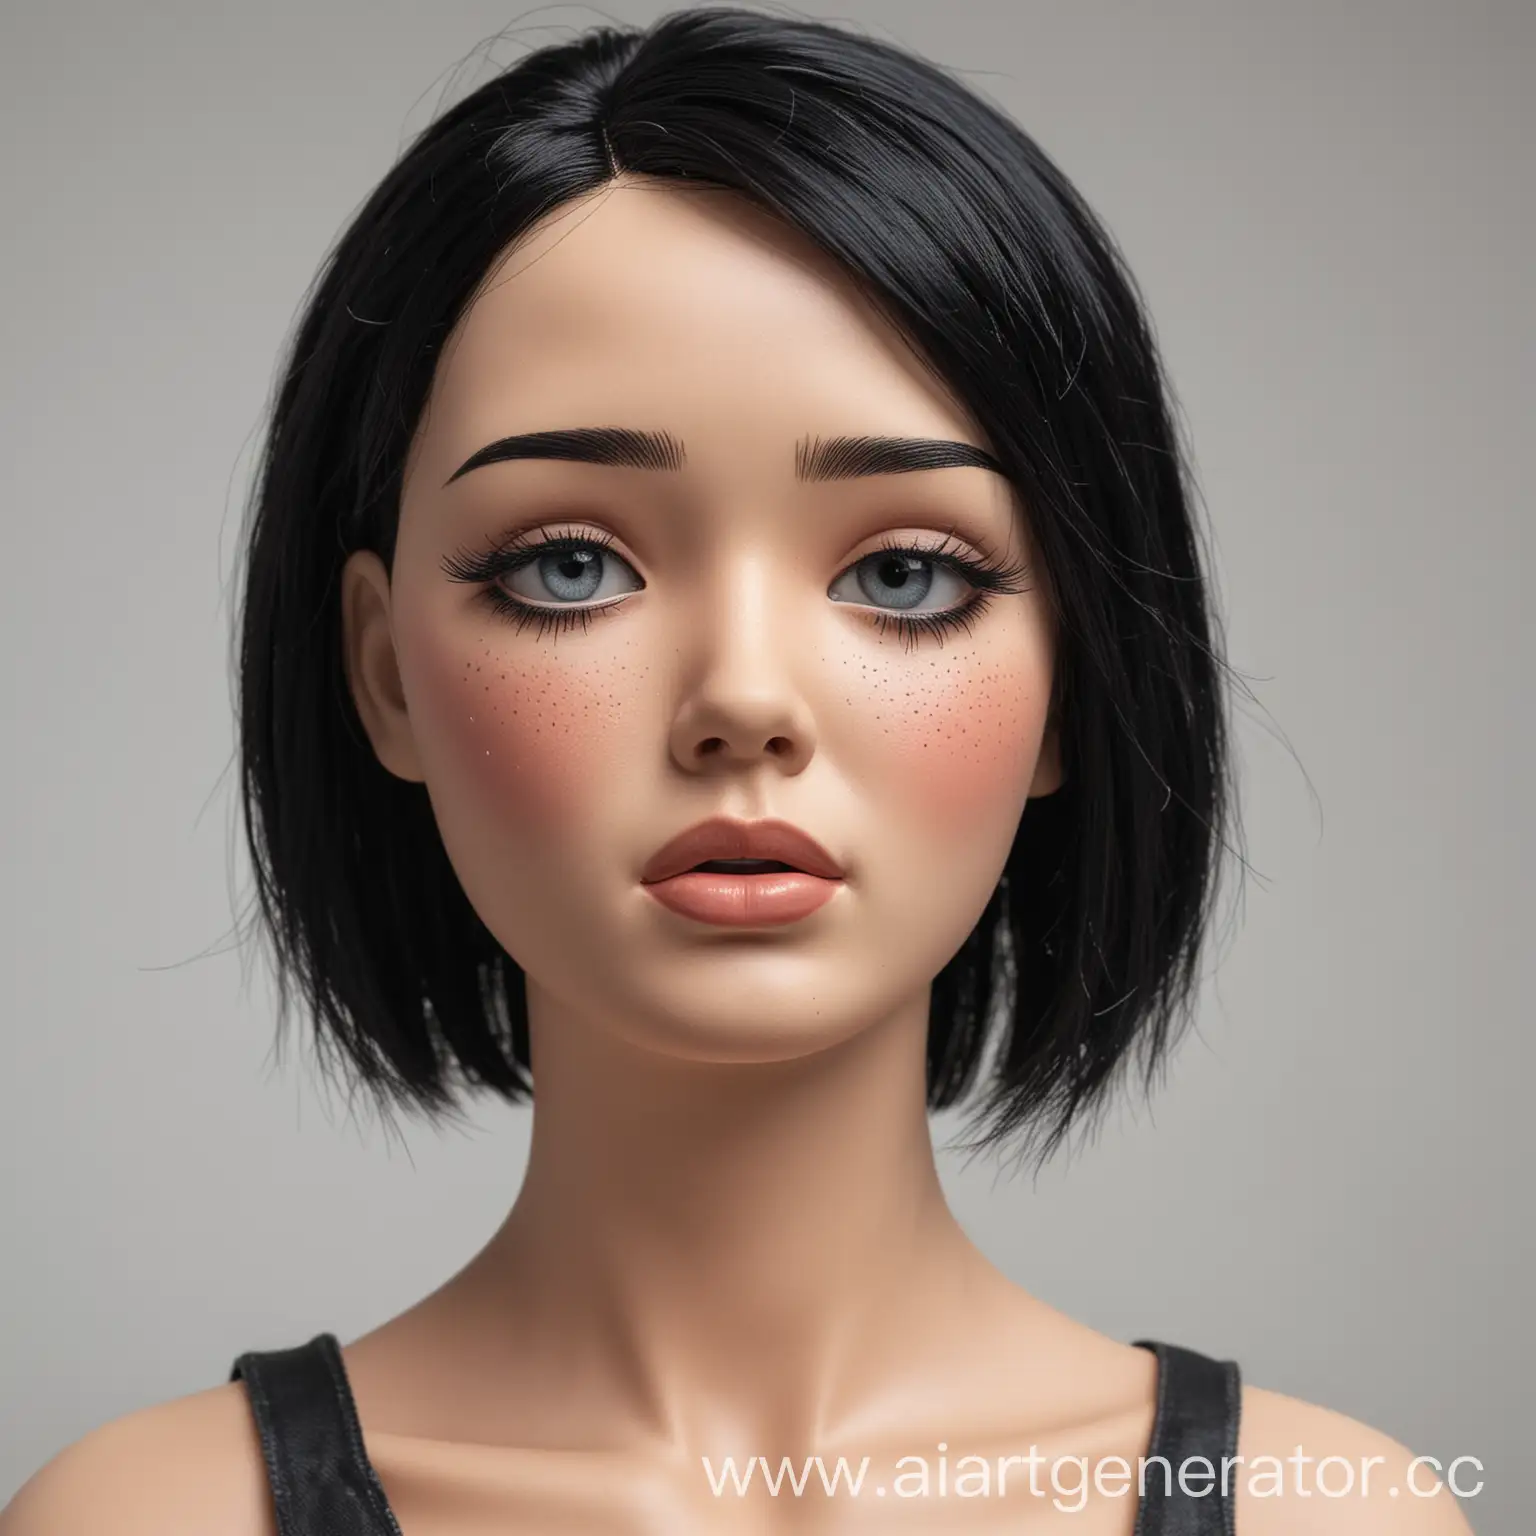 Mannequin-Girl-with-Black-Hair-Crying